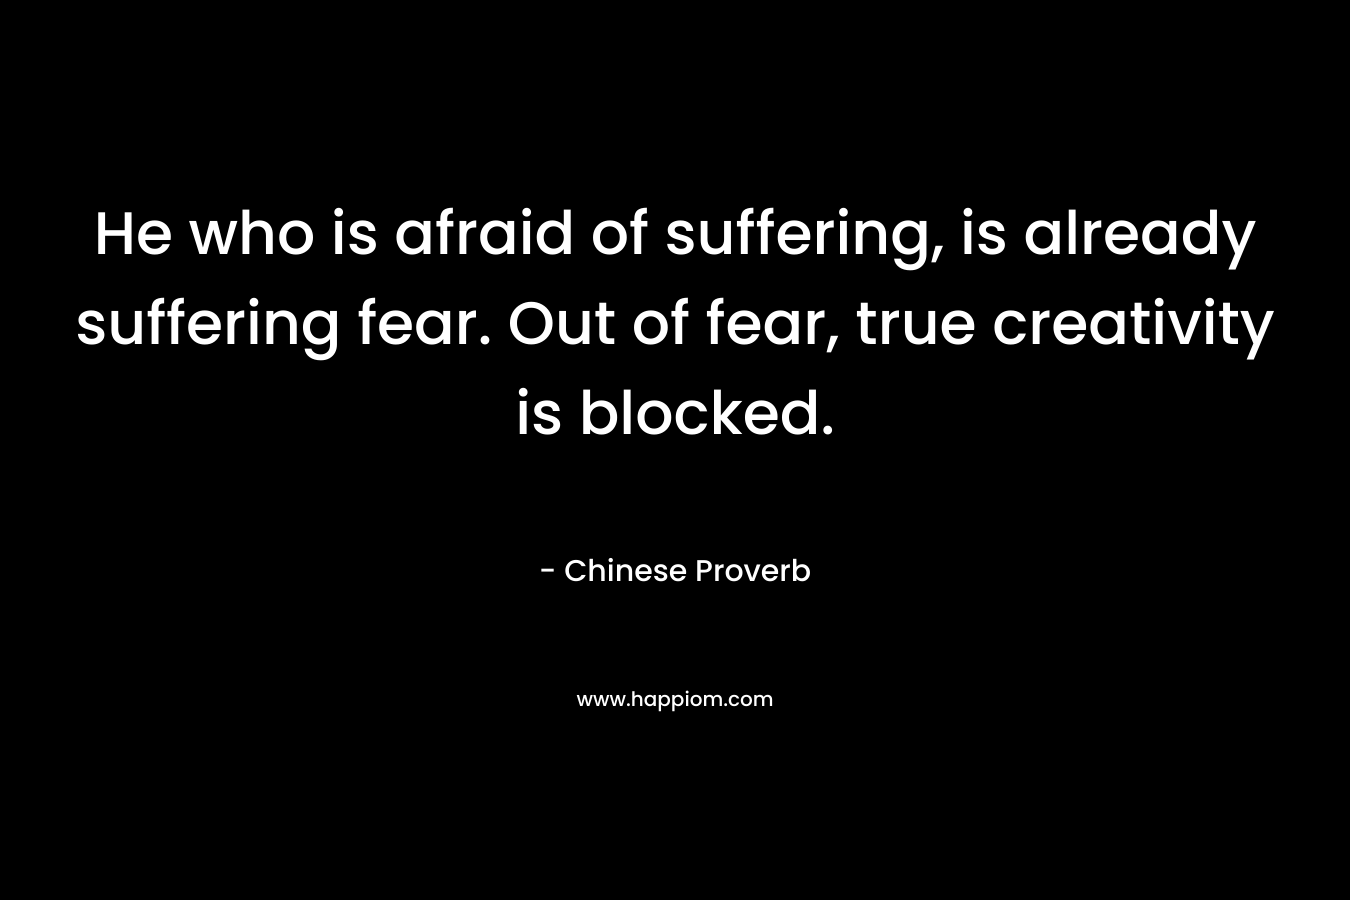 He who is afraid of suffering, is already suffering fear. Out of fear, true creativity is blocked. – Chinese Proverb